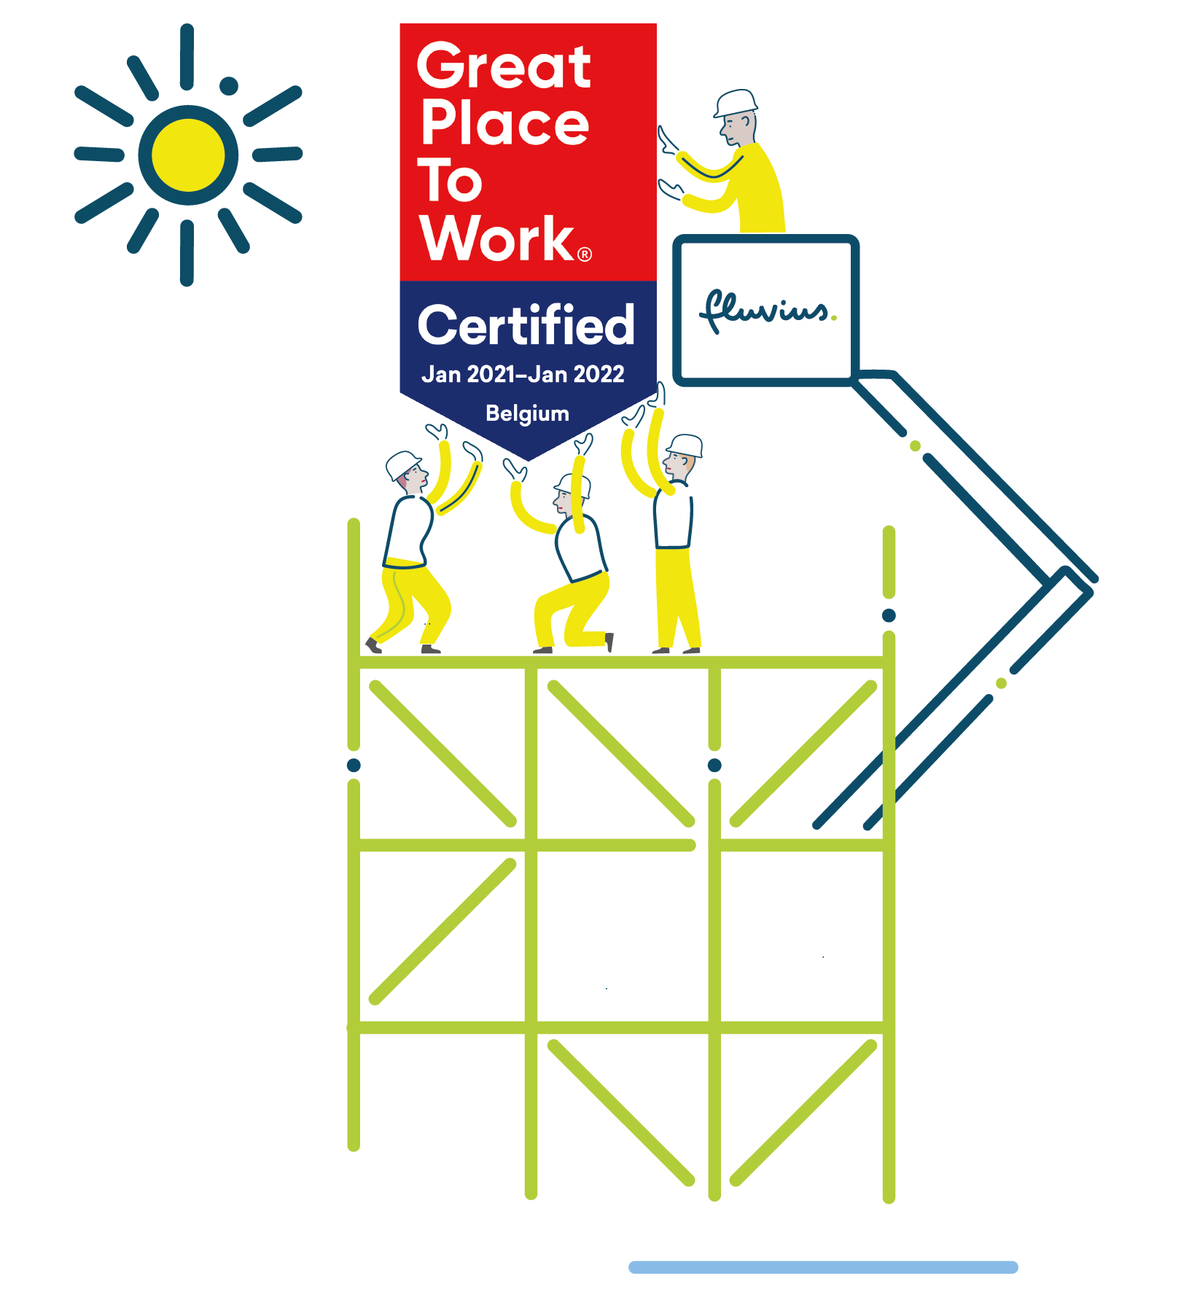 Fluvius is Great Place to Work Certified